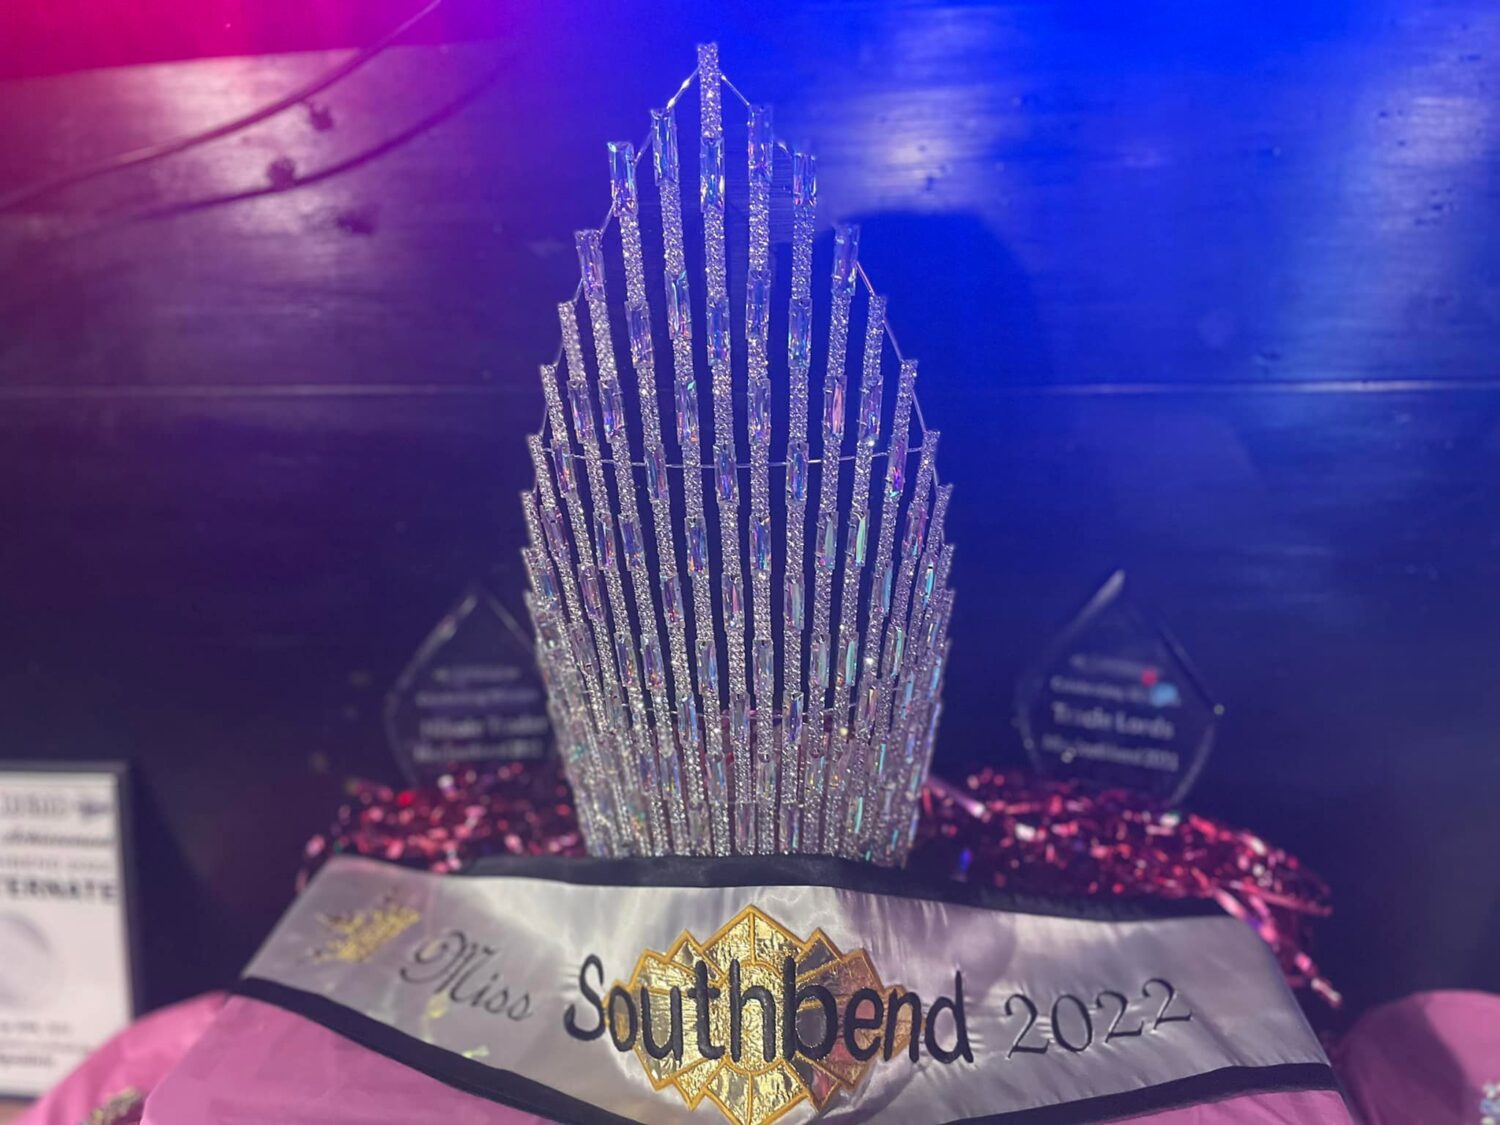 The crown and sash for Miss Southbend 2022 | Miss Southbend | Southbend Tavern (Columbus, Ohio) | 1/30/2022